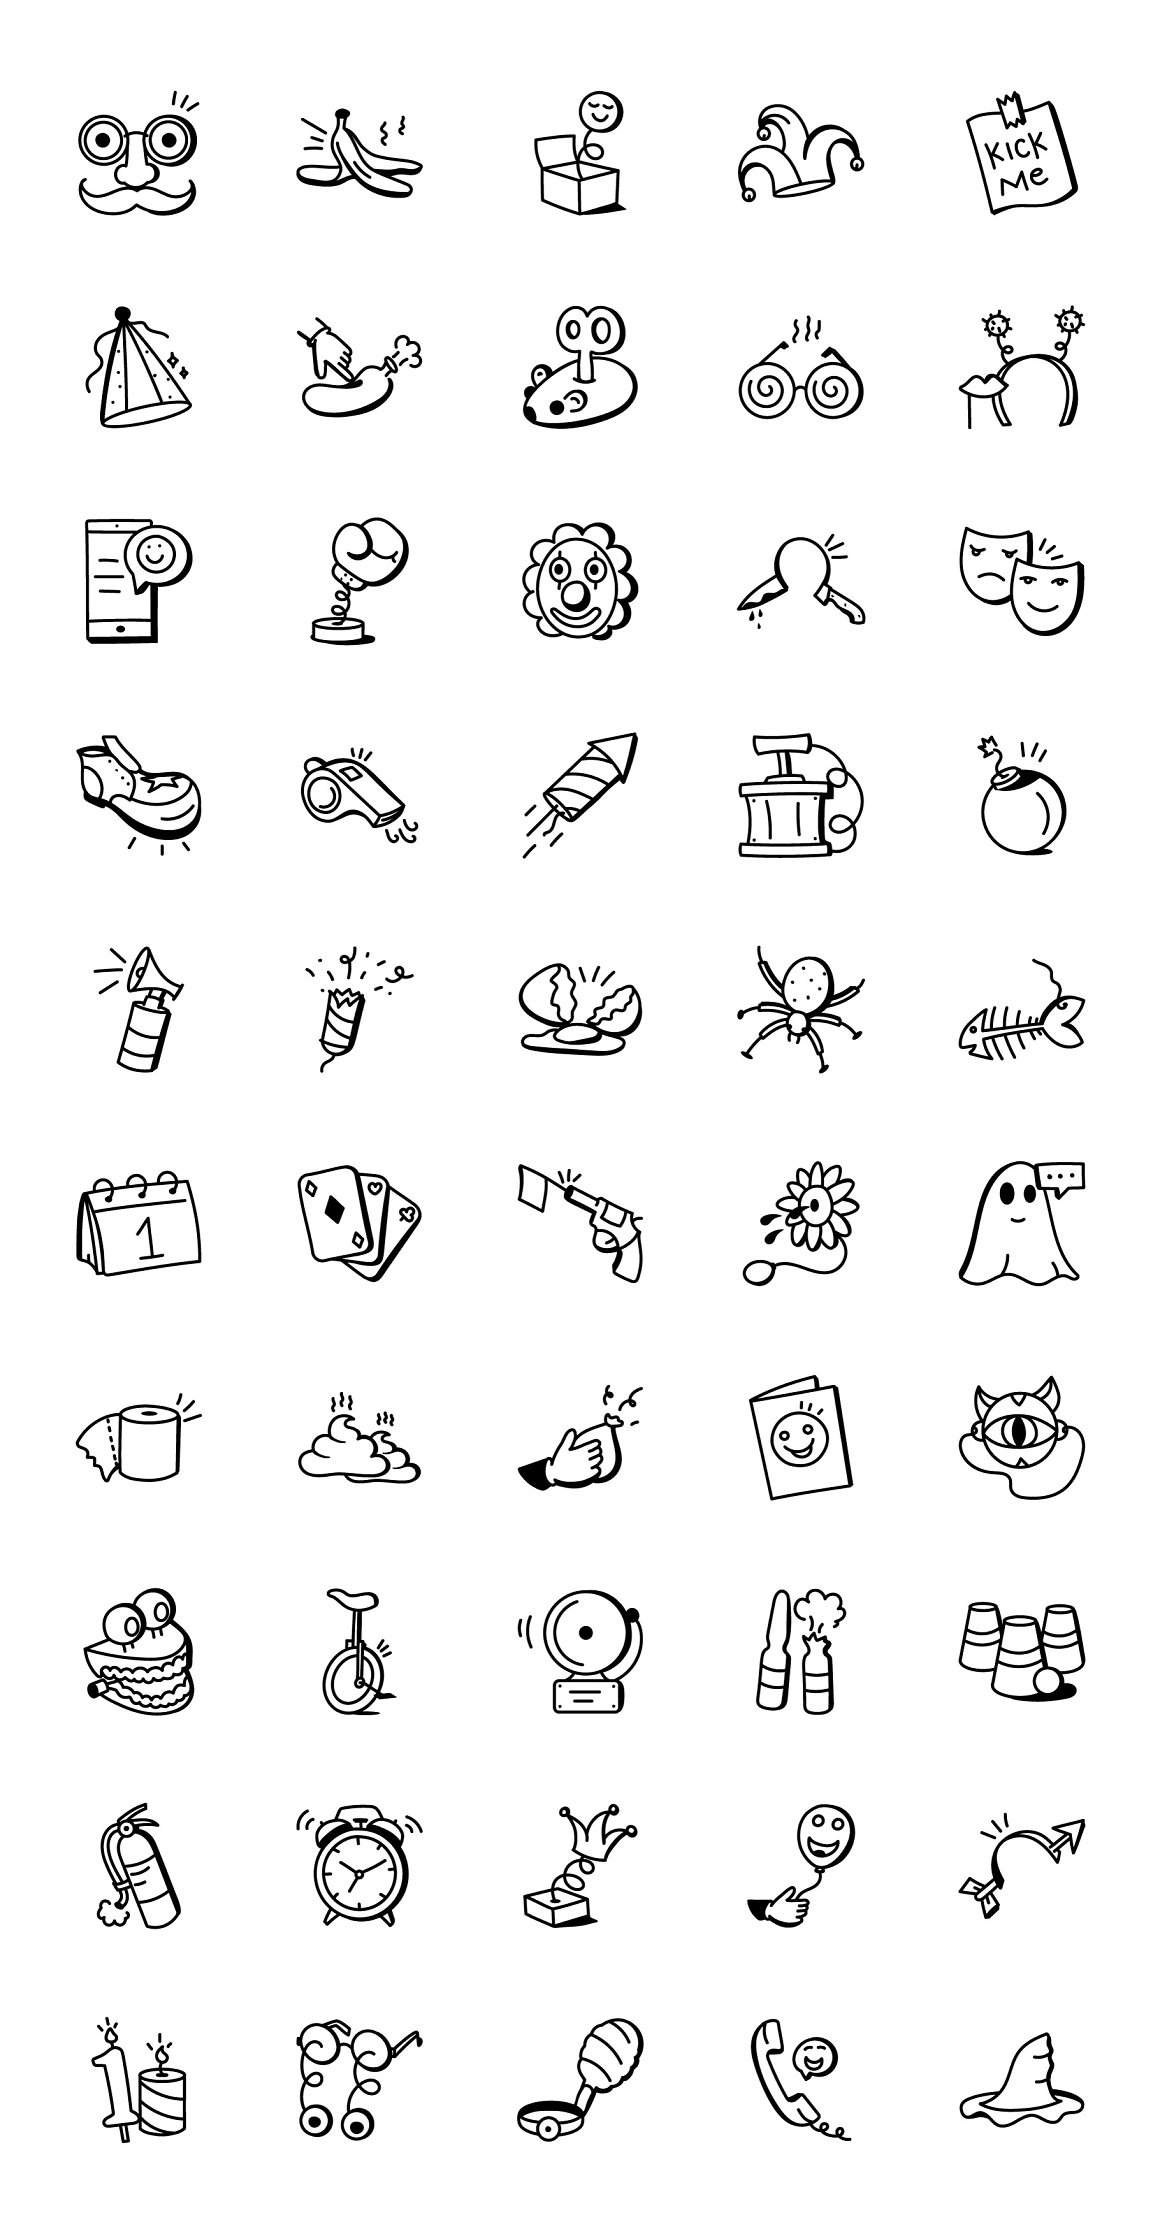 A set of 50 black april fools day icons on a white background.